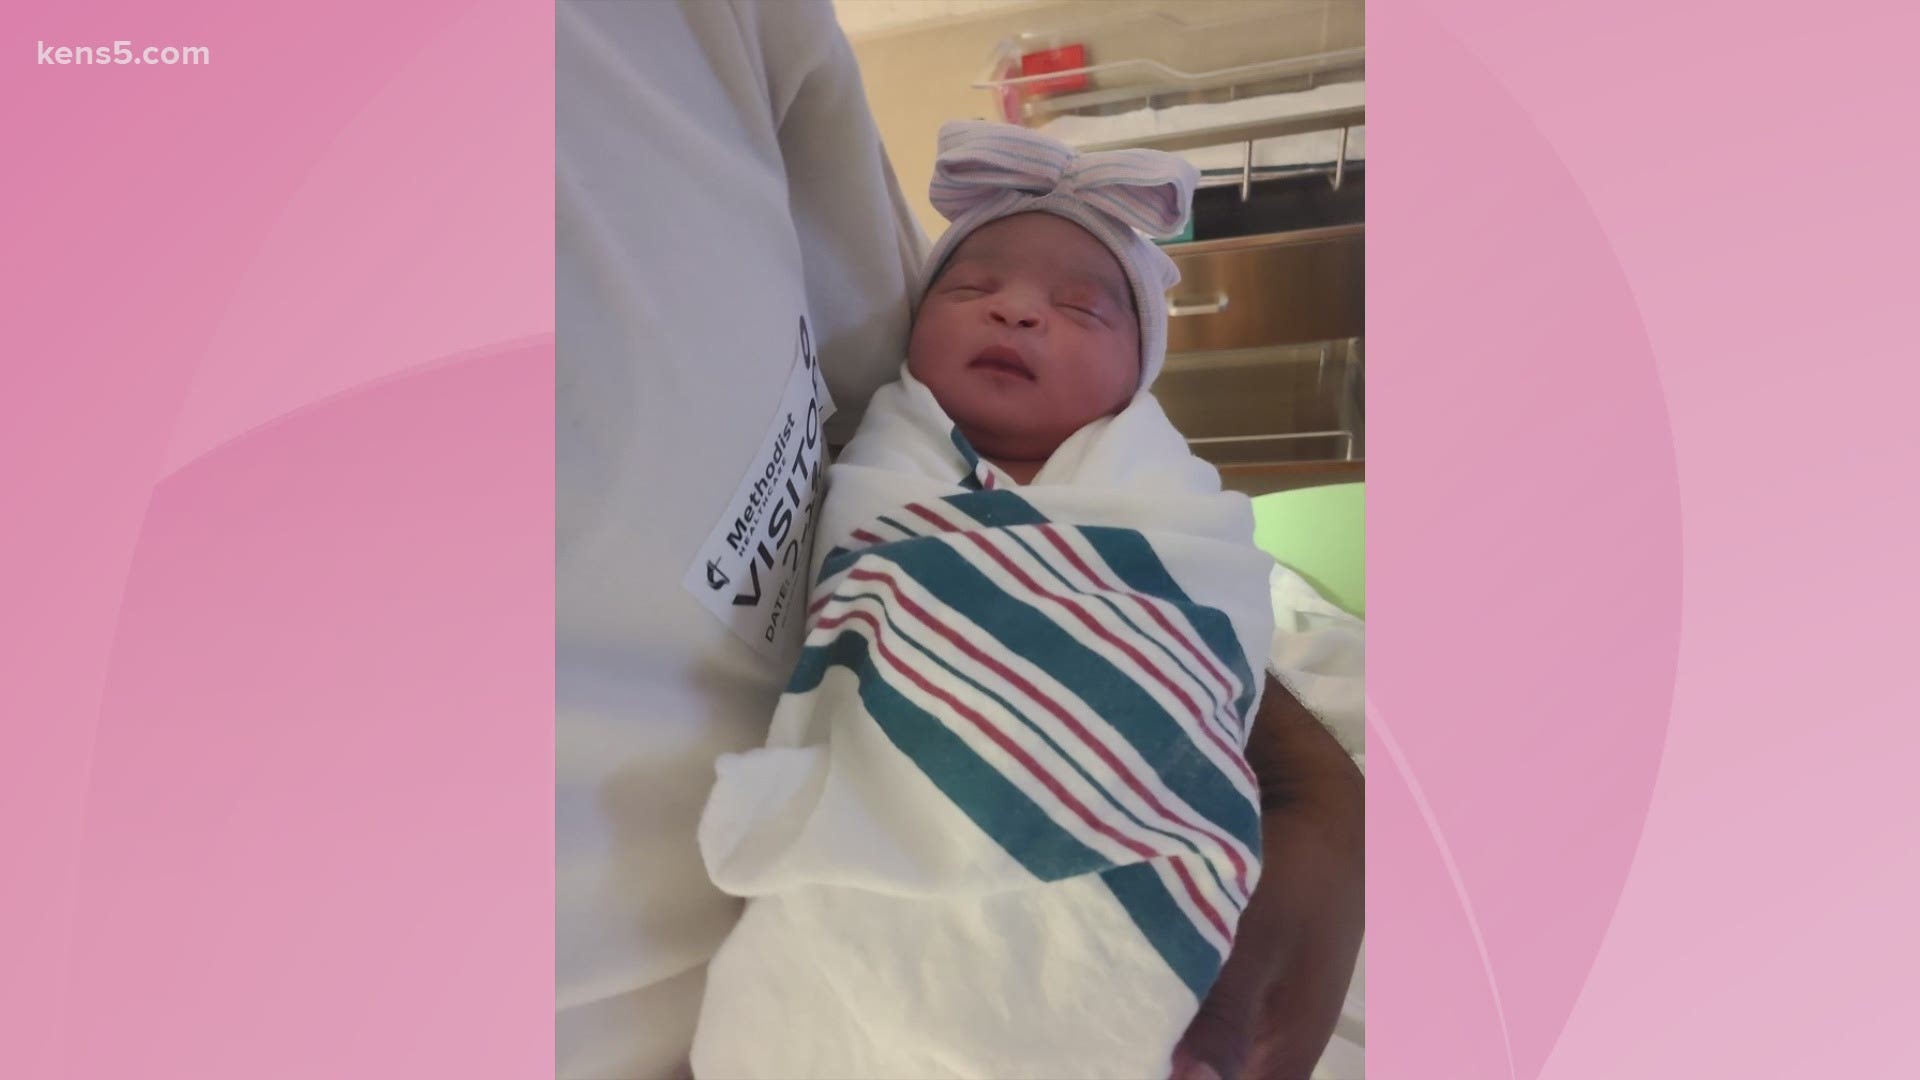 Congratulations to KENS 5 Eyewitness News producer Tara Moore - who welcomed baby Trinity Grace into the world on Wednesday, July 29.